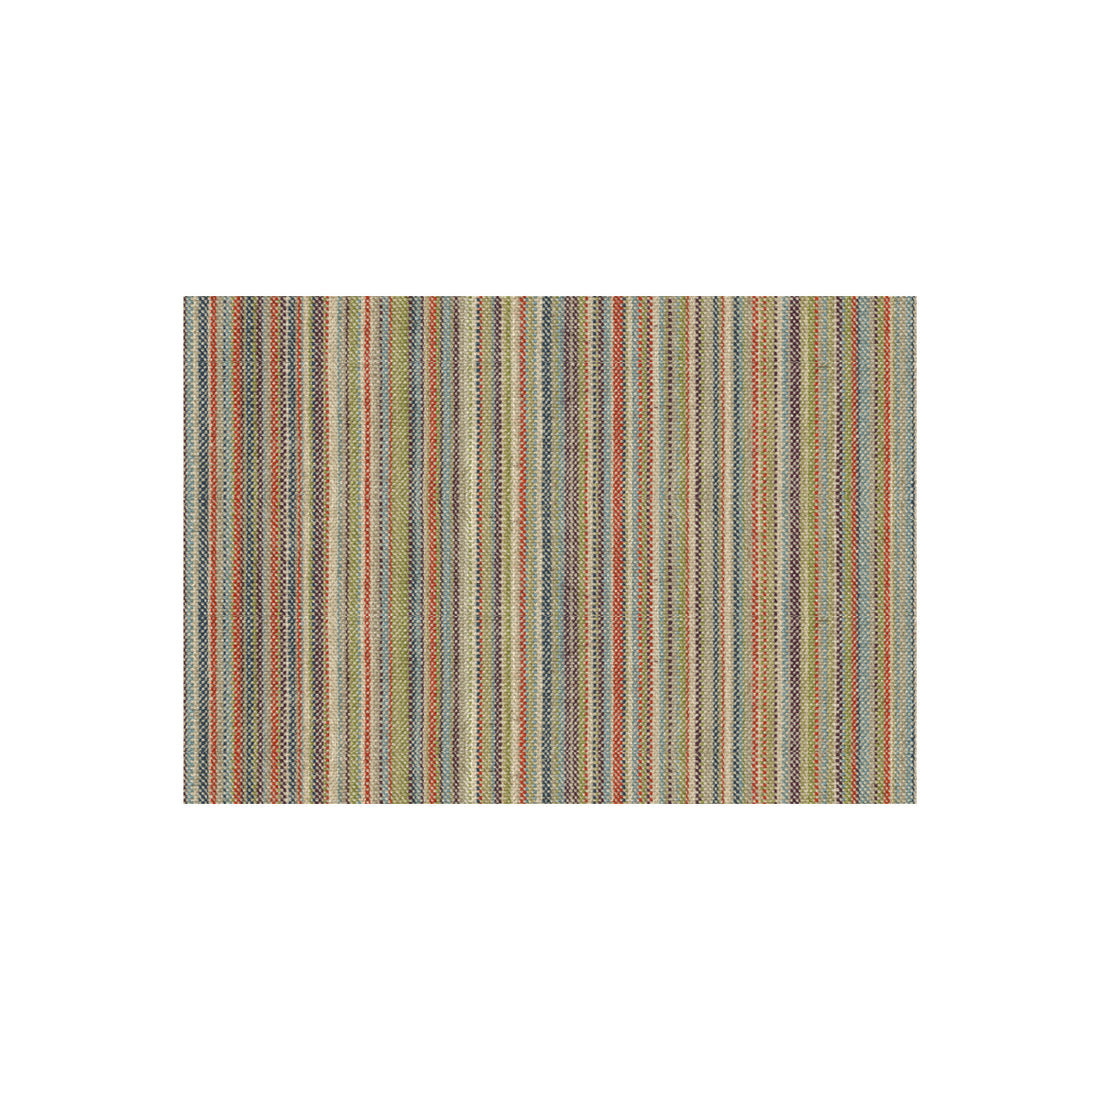 Joya Stripe fabric in tropic color - pattern 32916.512.0 - by Kravet Design in the Barclay Butera II collection